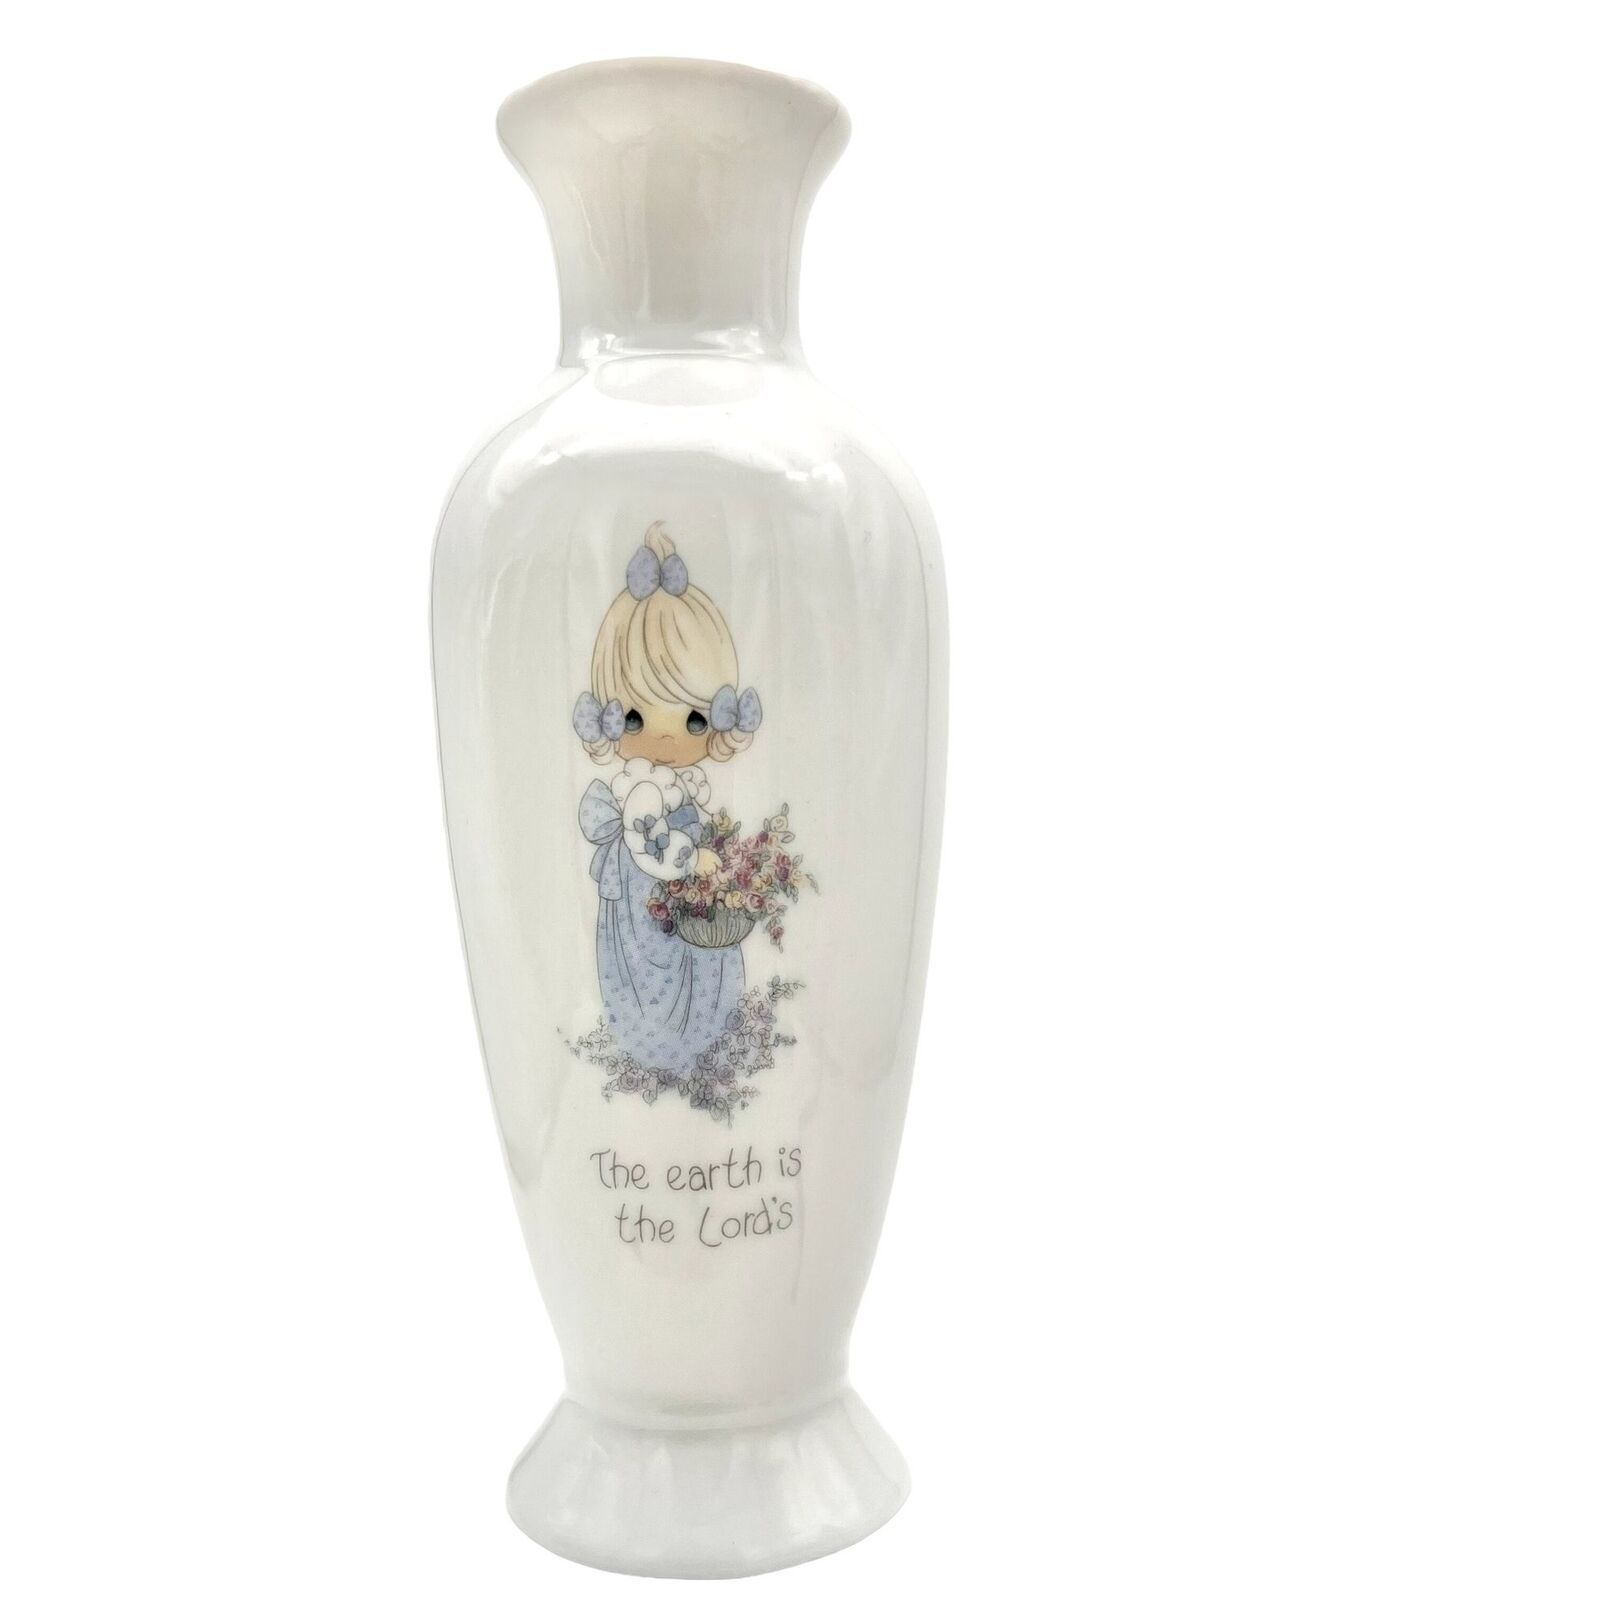 Primary image for Precious Moments Vase 6 inch tall White with Girl "The earth is the Lord's"